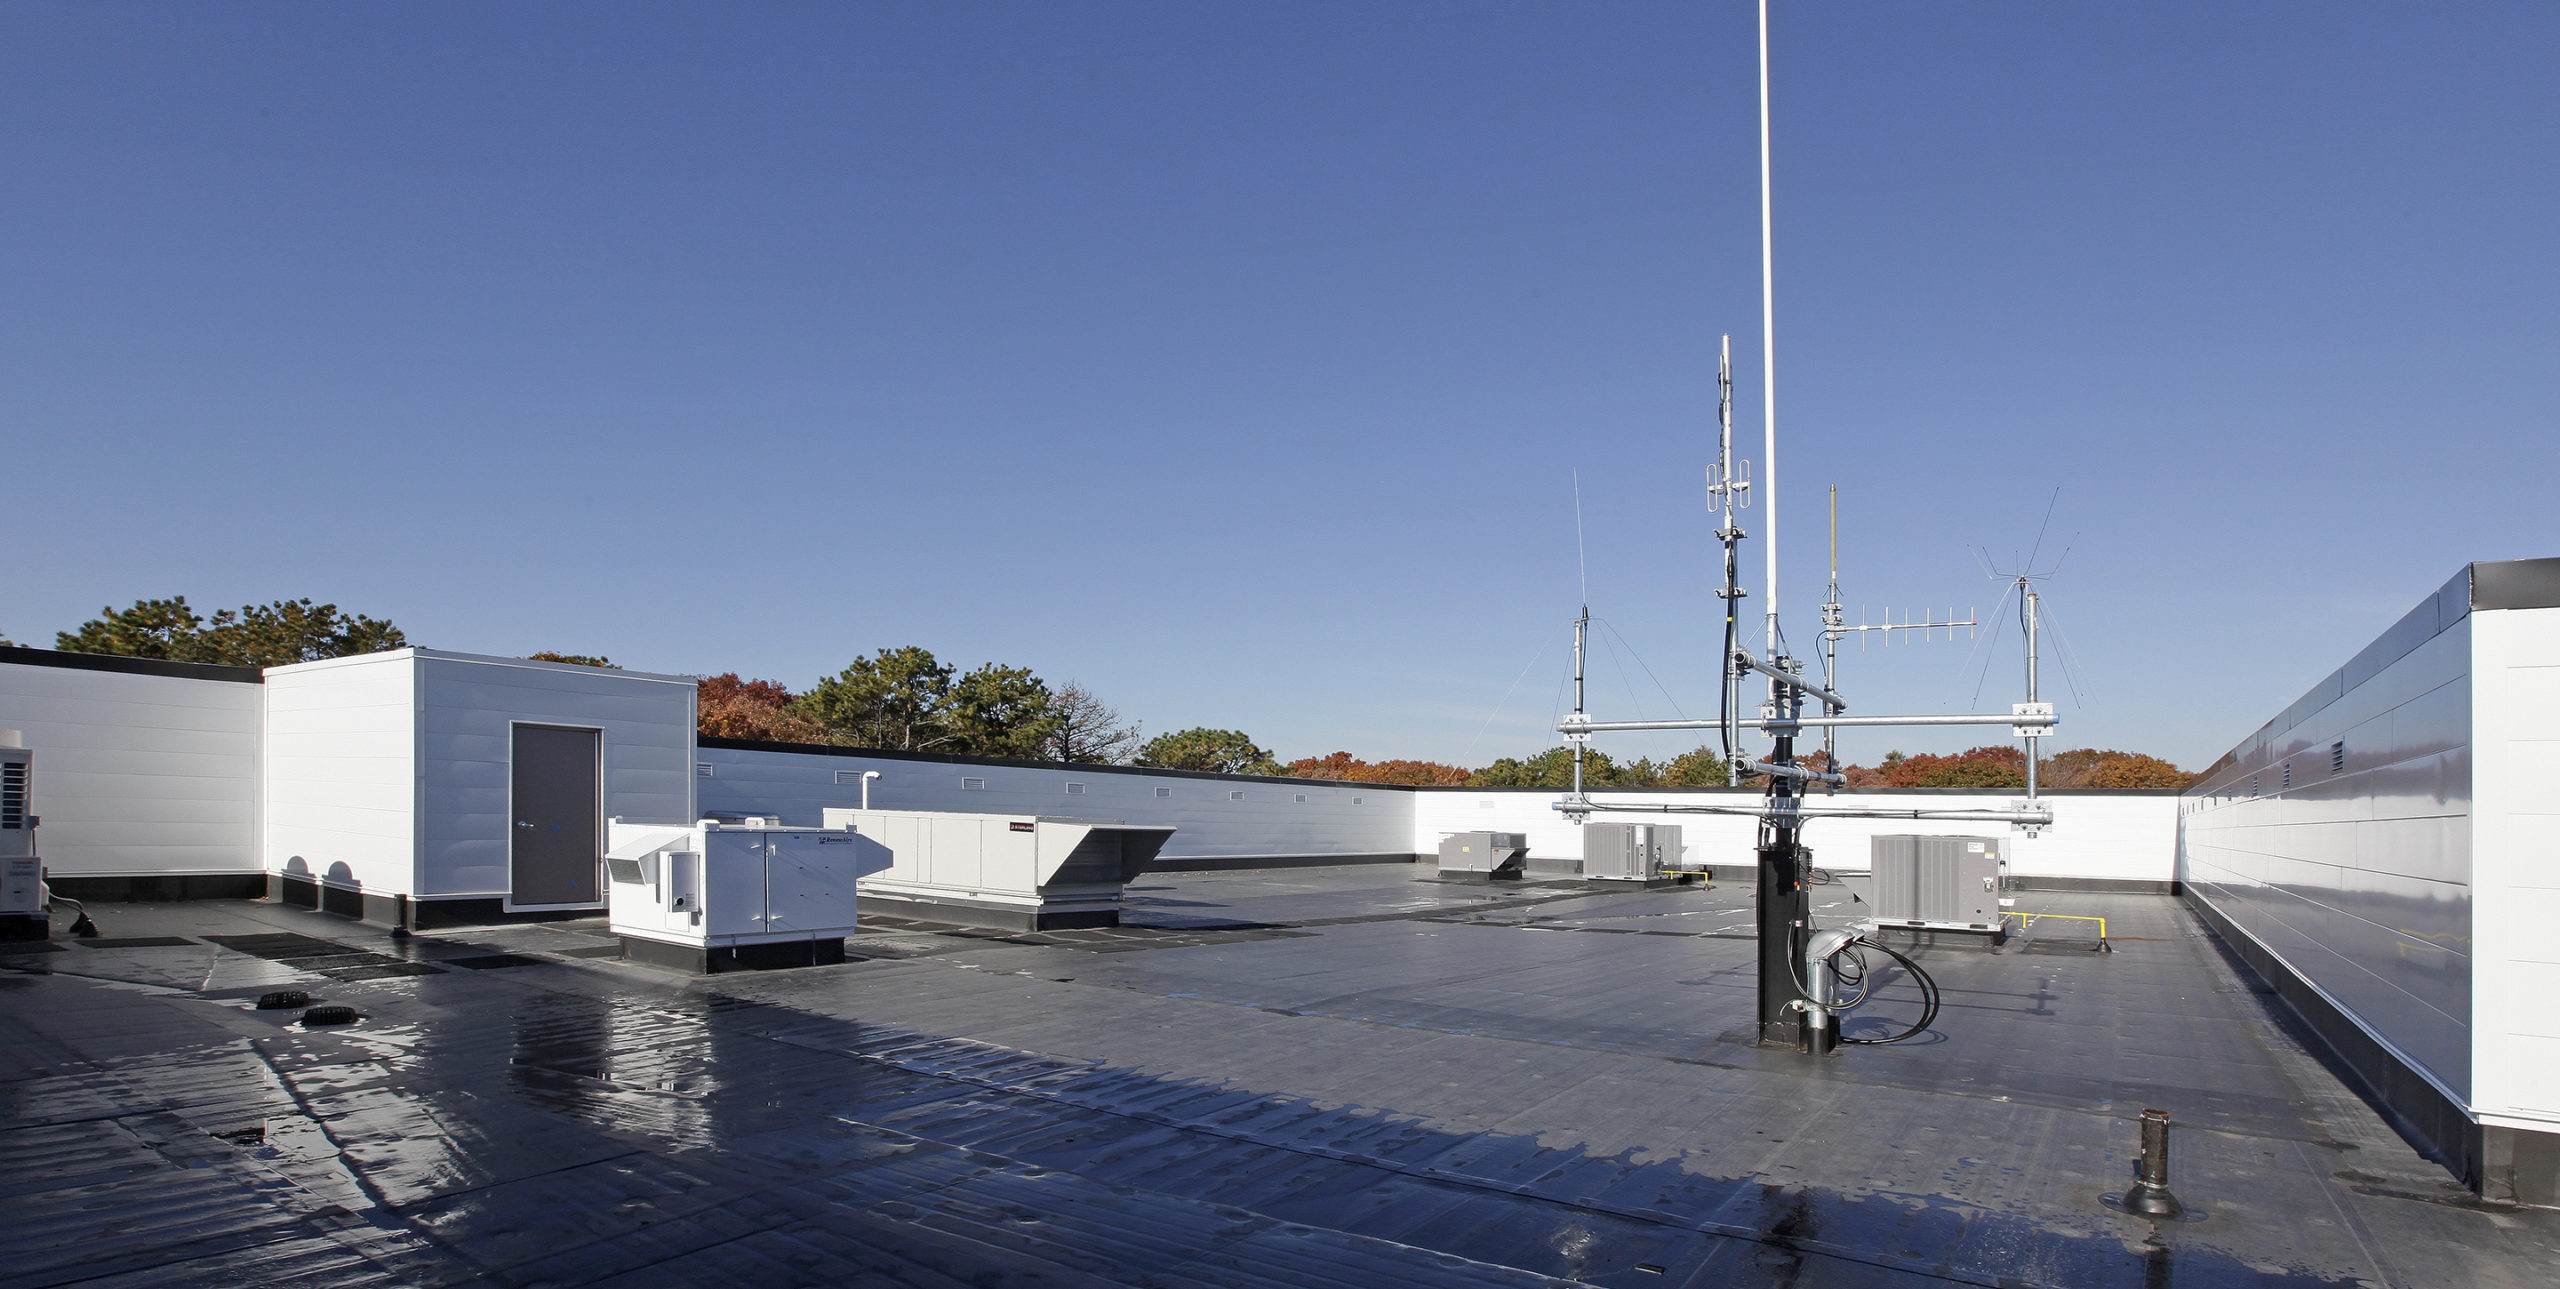 Rooftop of Community Ambulance of Sayville